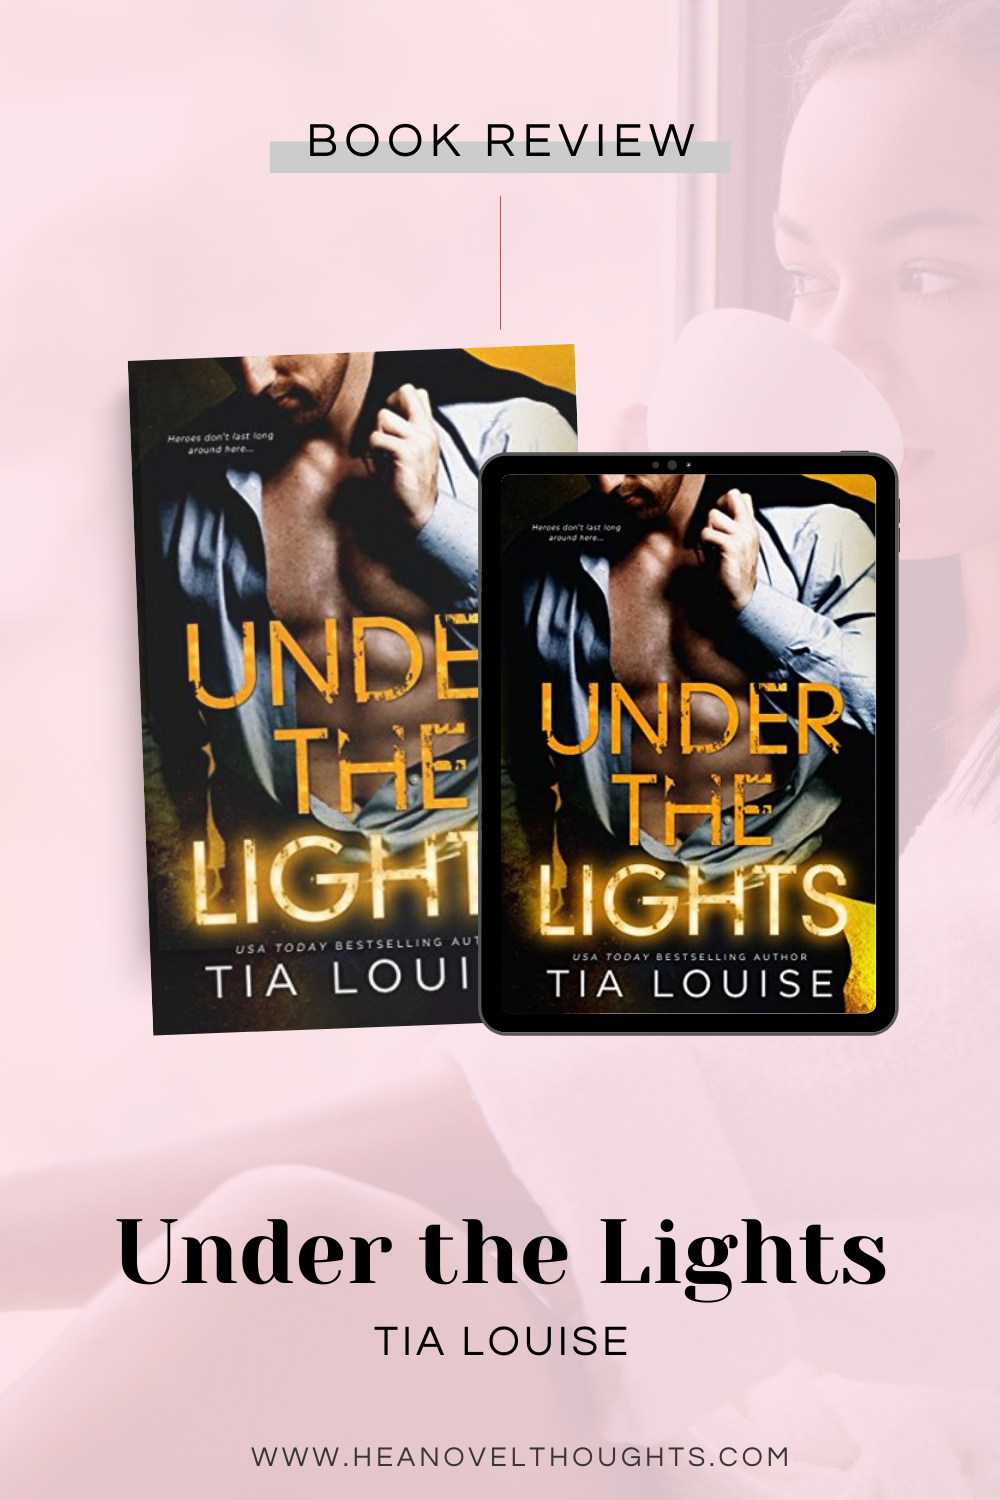 Under the Lights by Tia Louise